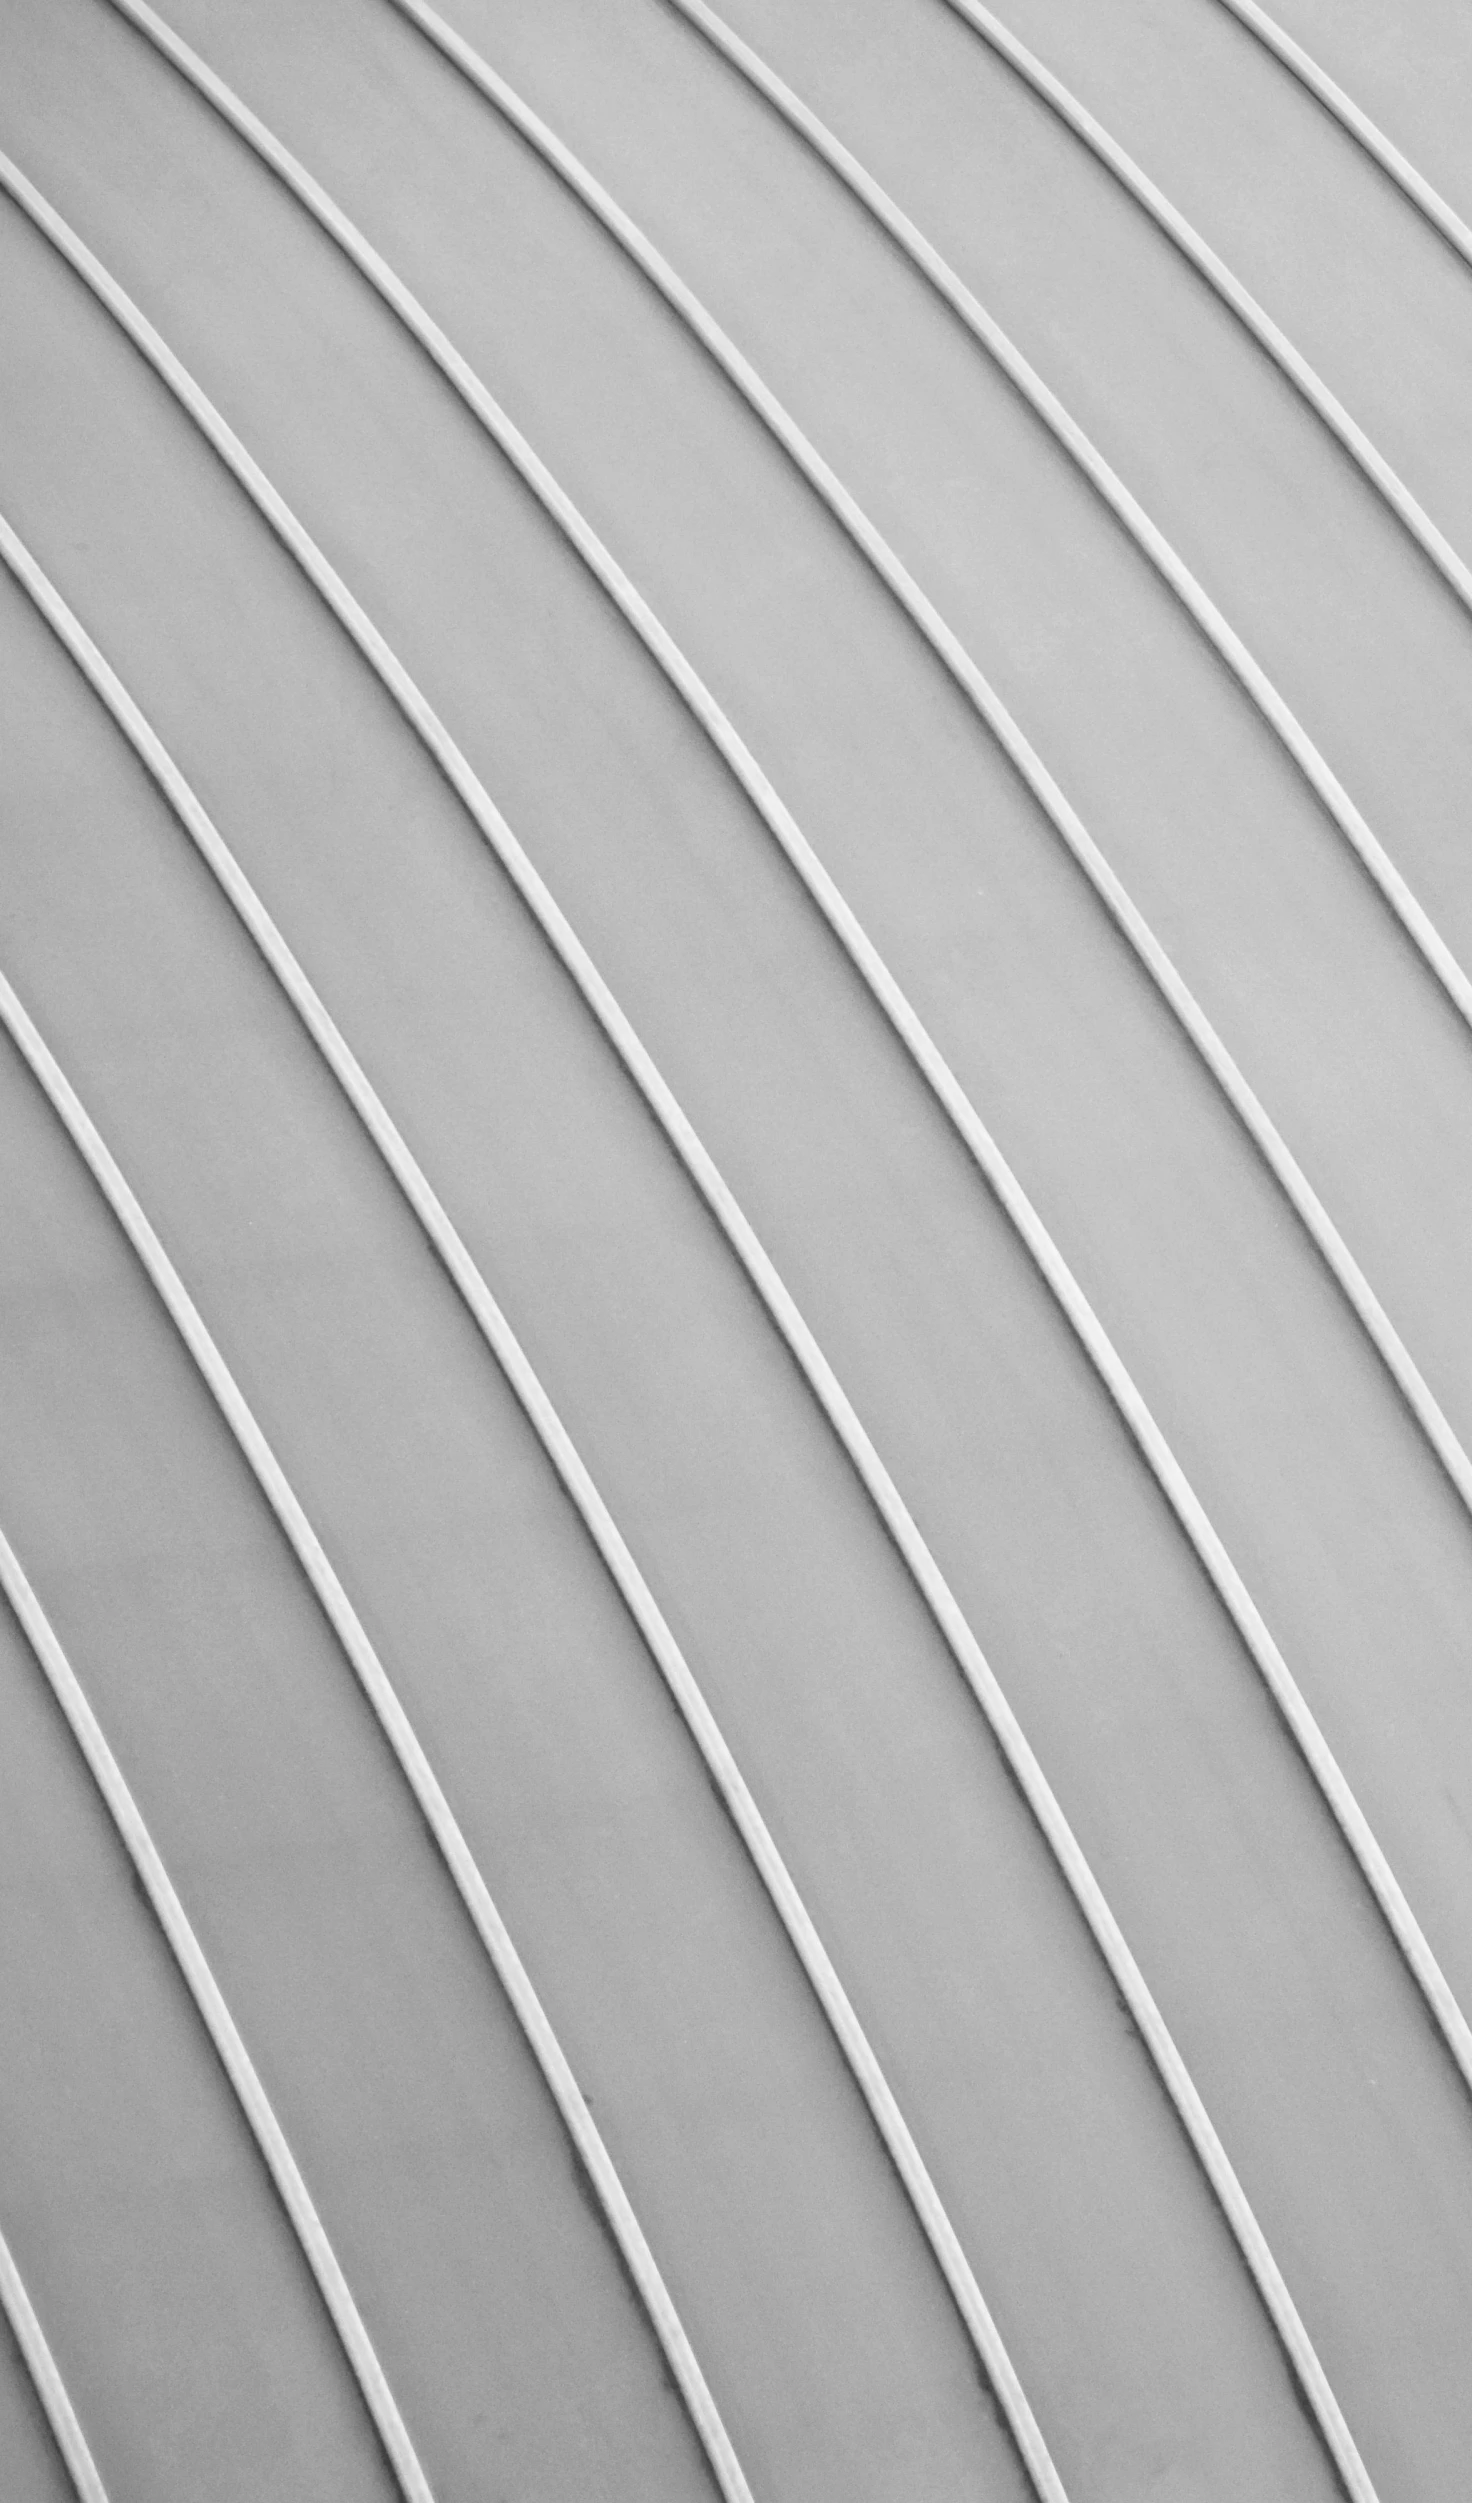 a black and white photo of a building, by Julian Allen, op art, galvalume metal roofing, curved lines, silver，ivory, close-up product photo